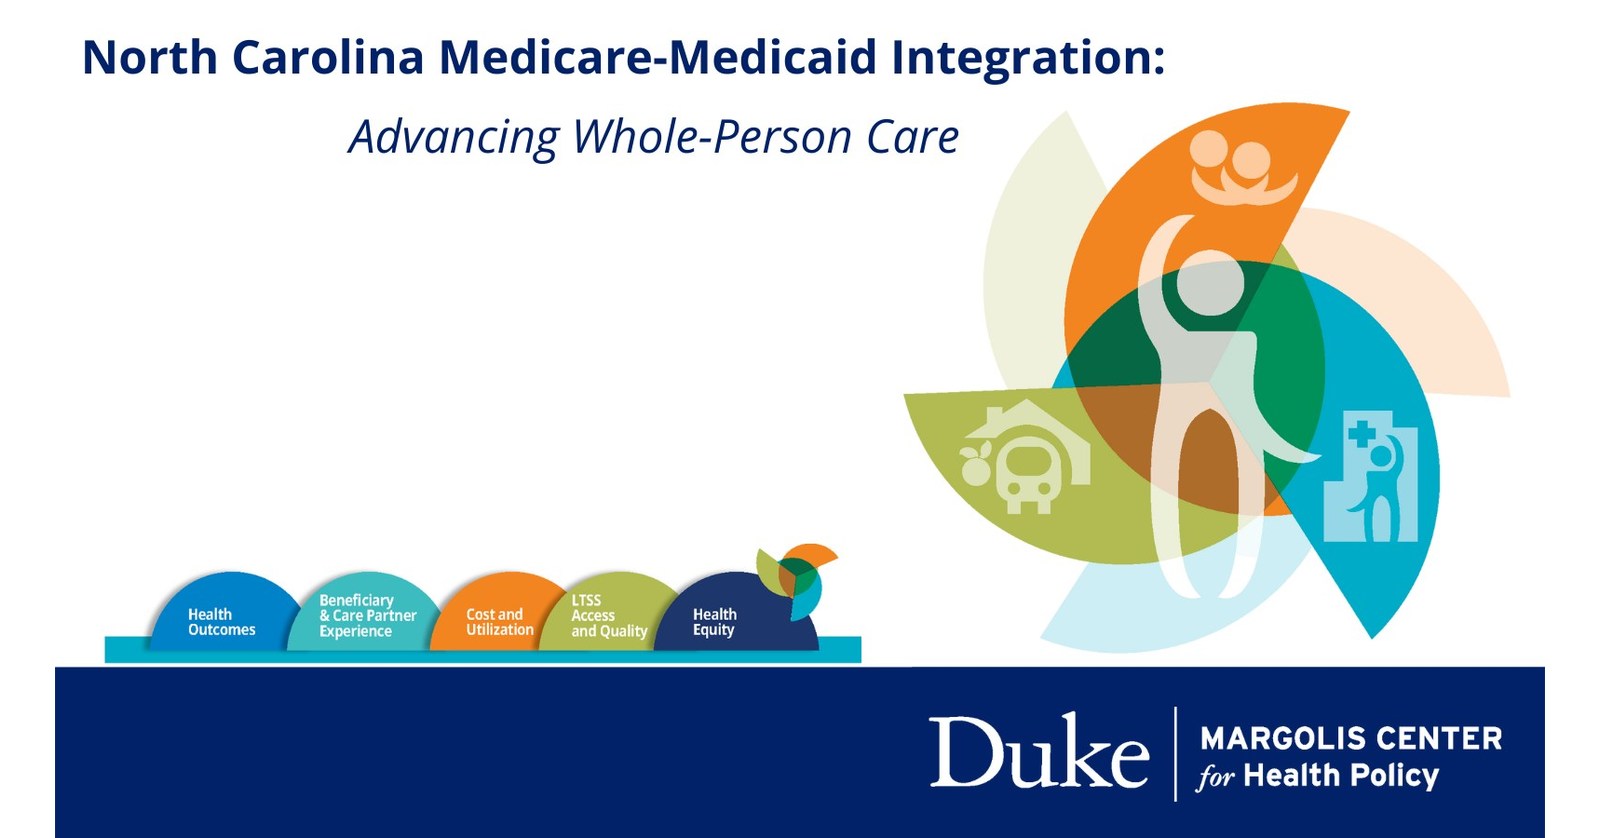 Duke-Margolis Recommends North Carolina Pursue Most Comprehensive Approach to Integrate Medicare-Medicaid and Achieve Whole-Person Care